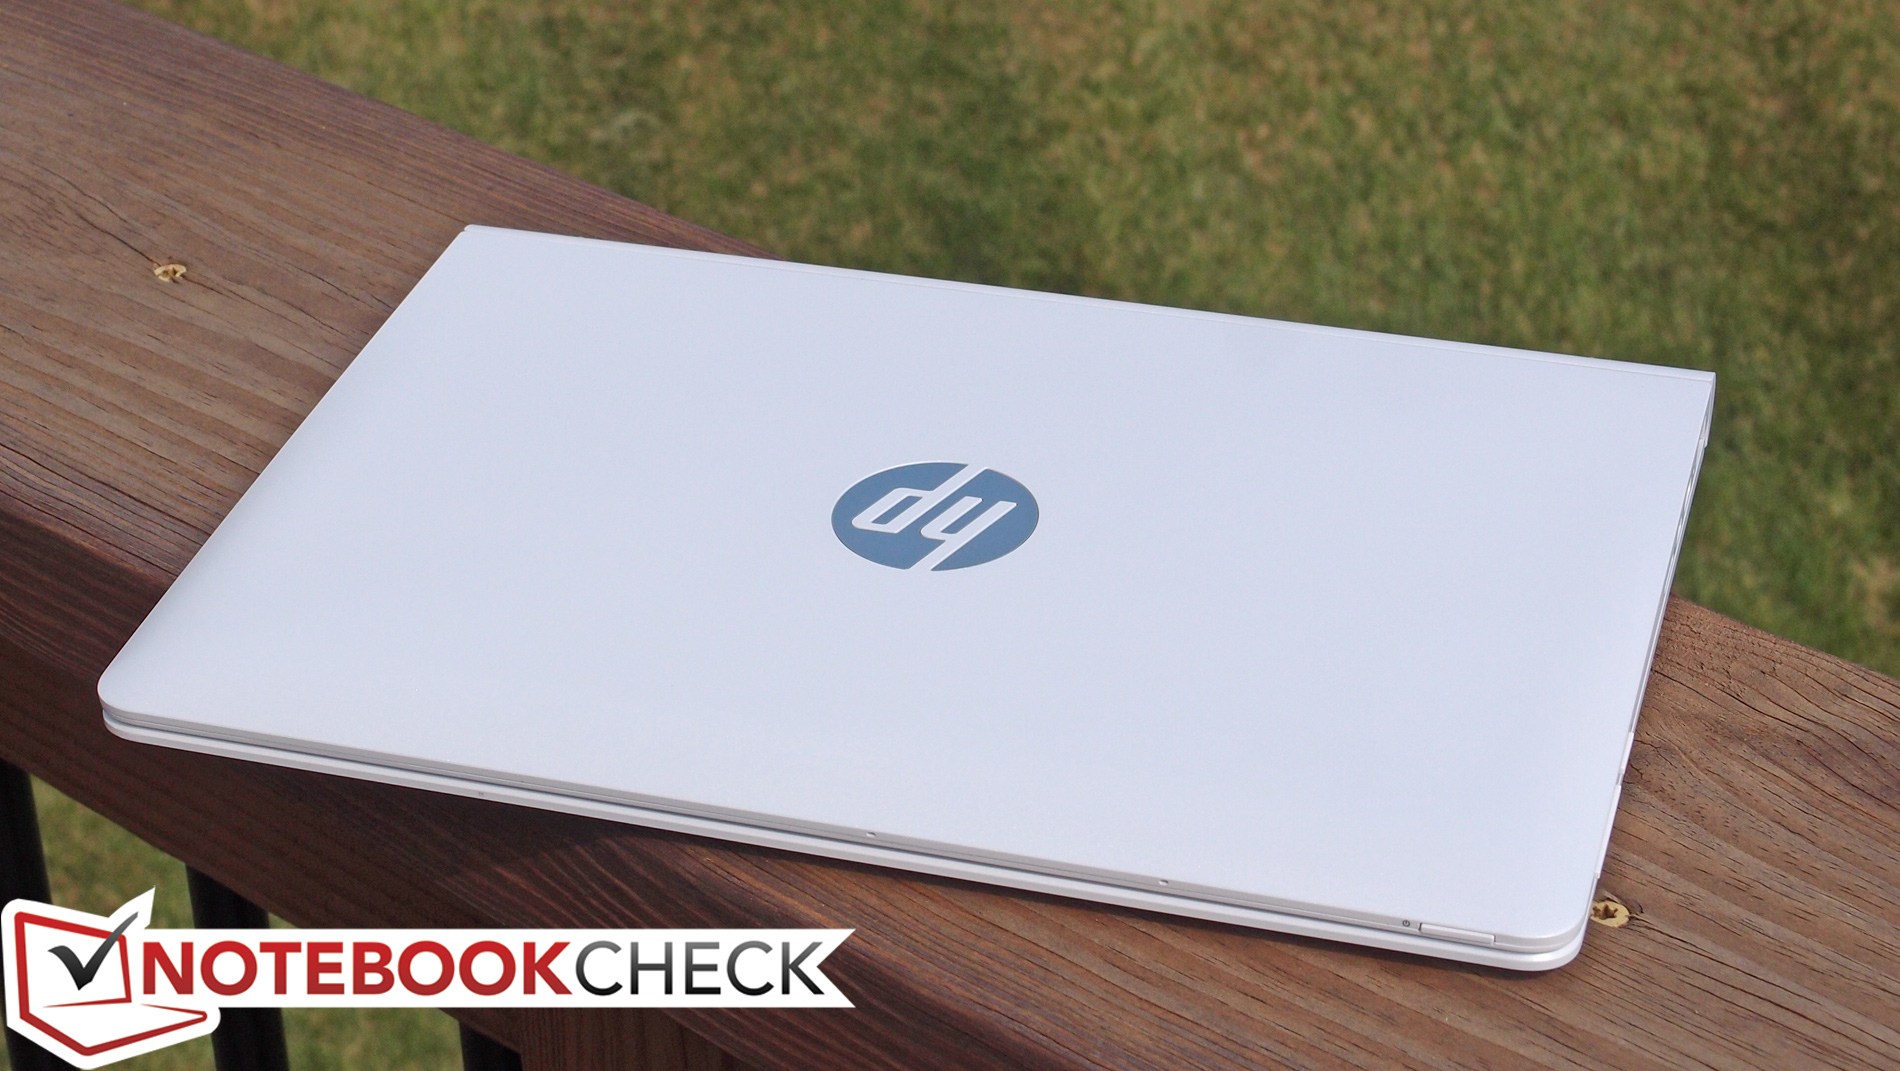 HP Pavilion x2 10-n013dx Convertible Review - NotebookCheck.net